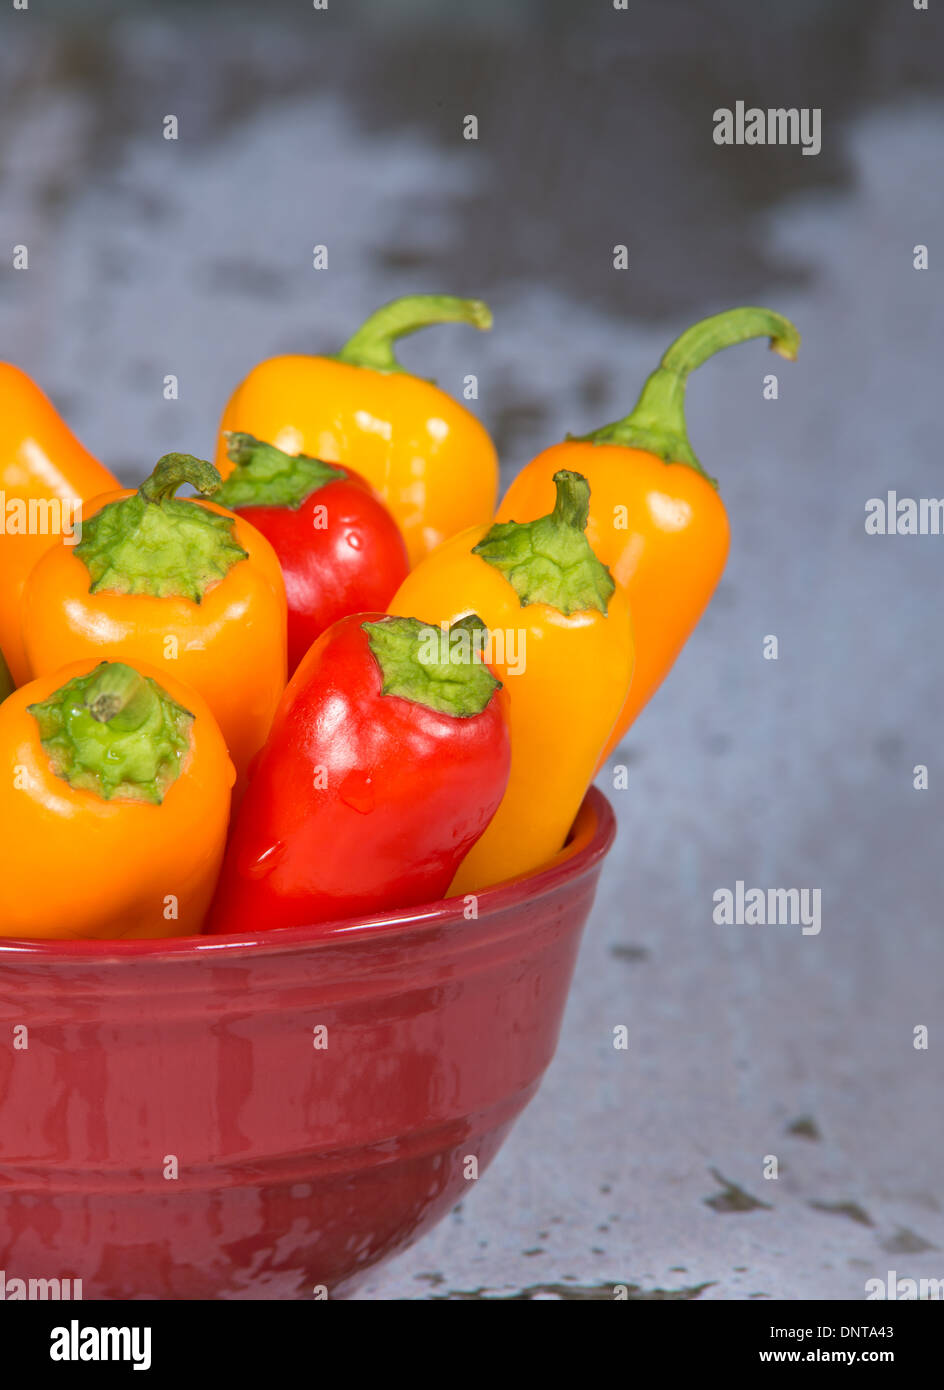 Sweet mini peppers in red bowl. Closeup with shallow depth of field. Stock Photo